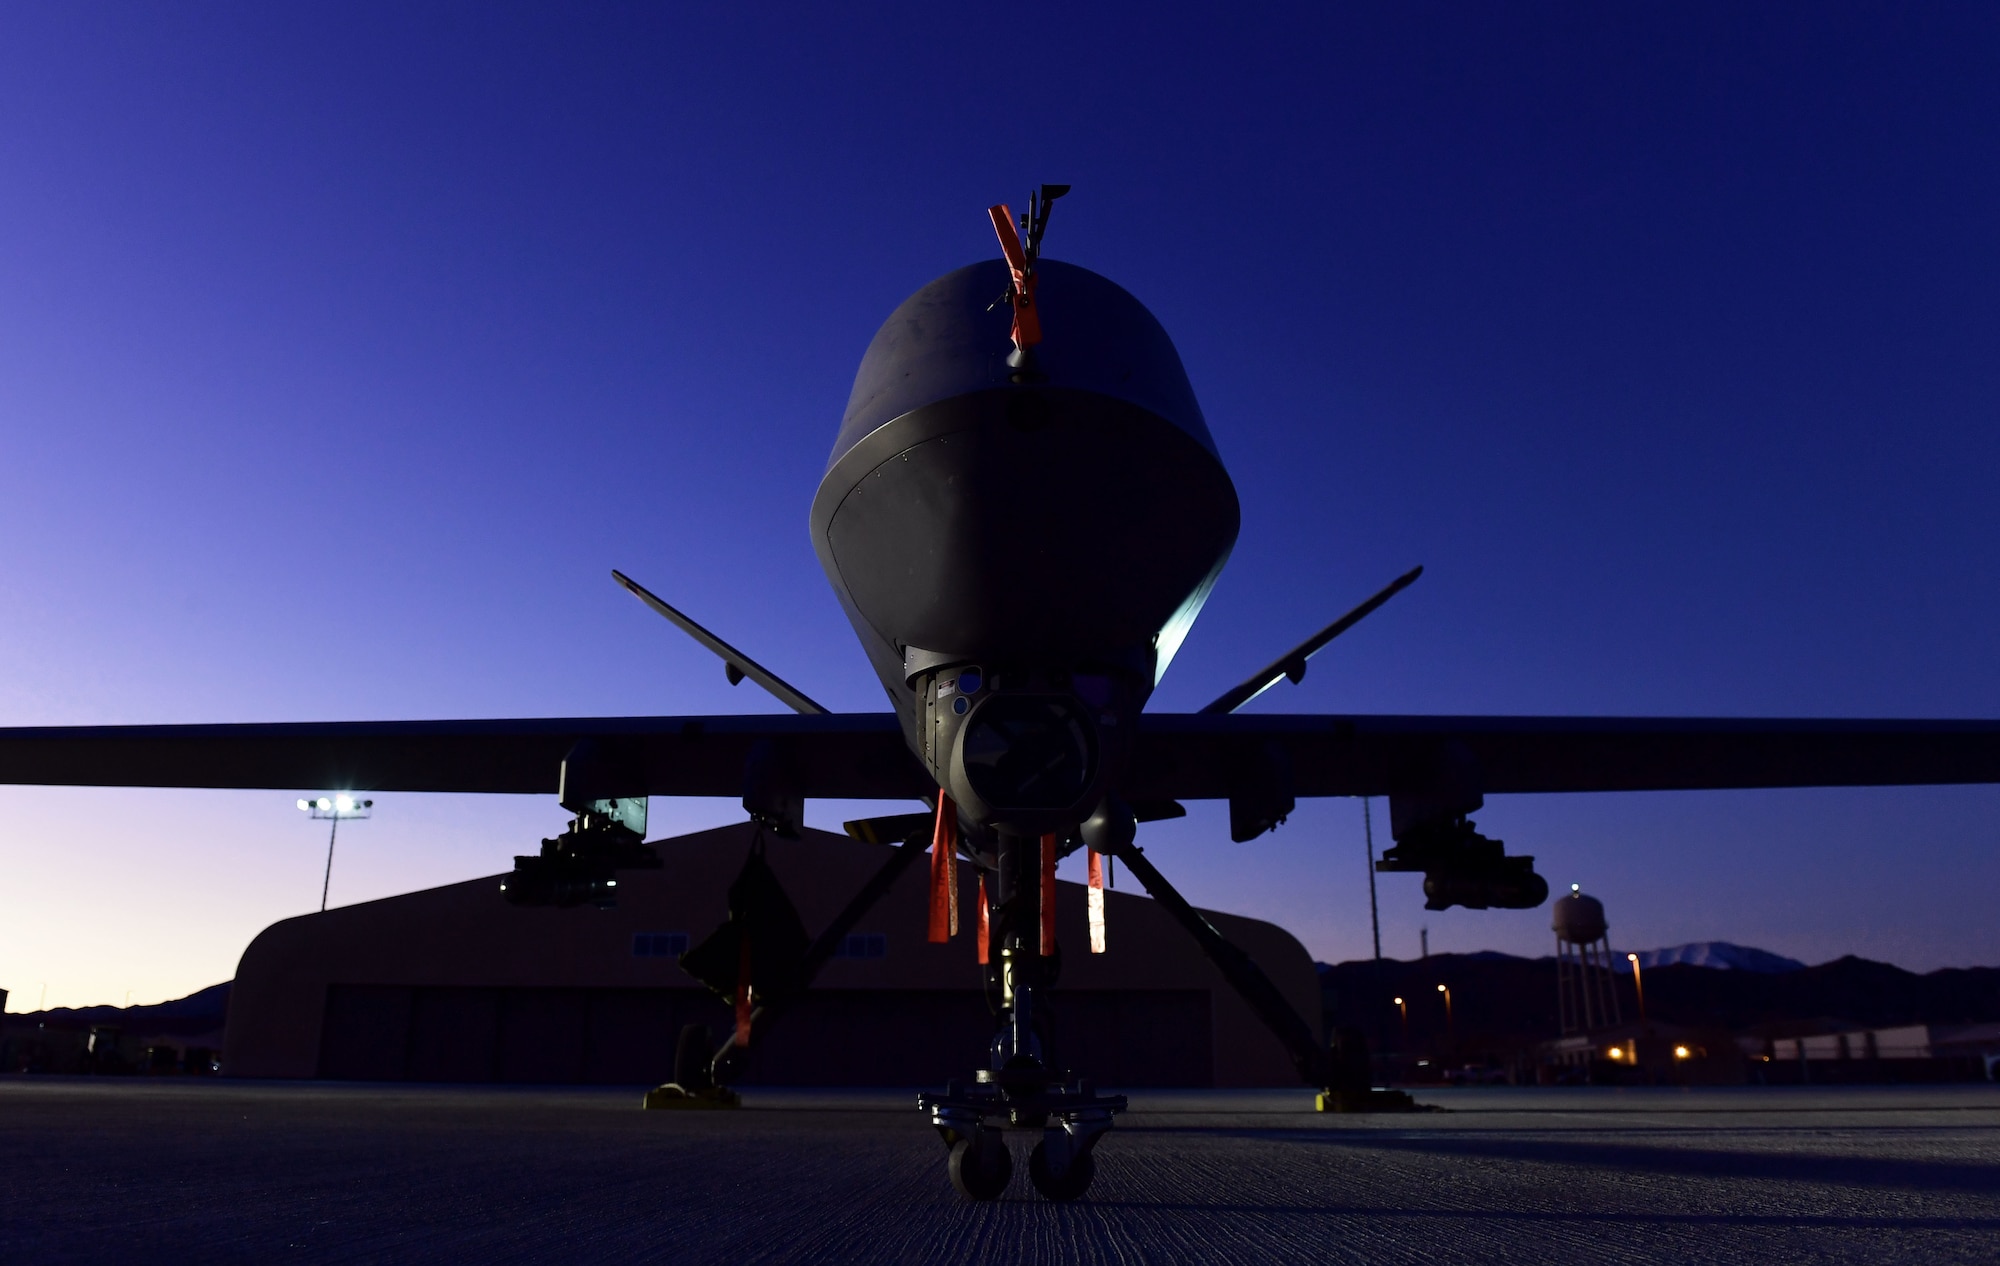 An MQ-9 Reaper sits on the flight line at Creech Air Force Base, Nevada, Dec. 17, 2019. The Remotely Piloted Aircraft enterprise is made of Airmen across all career fields to deliver justice to our Nation’s enemies 24/7/365. (U.S. Air Force photo by Senior Airman Haley Stevens)